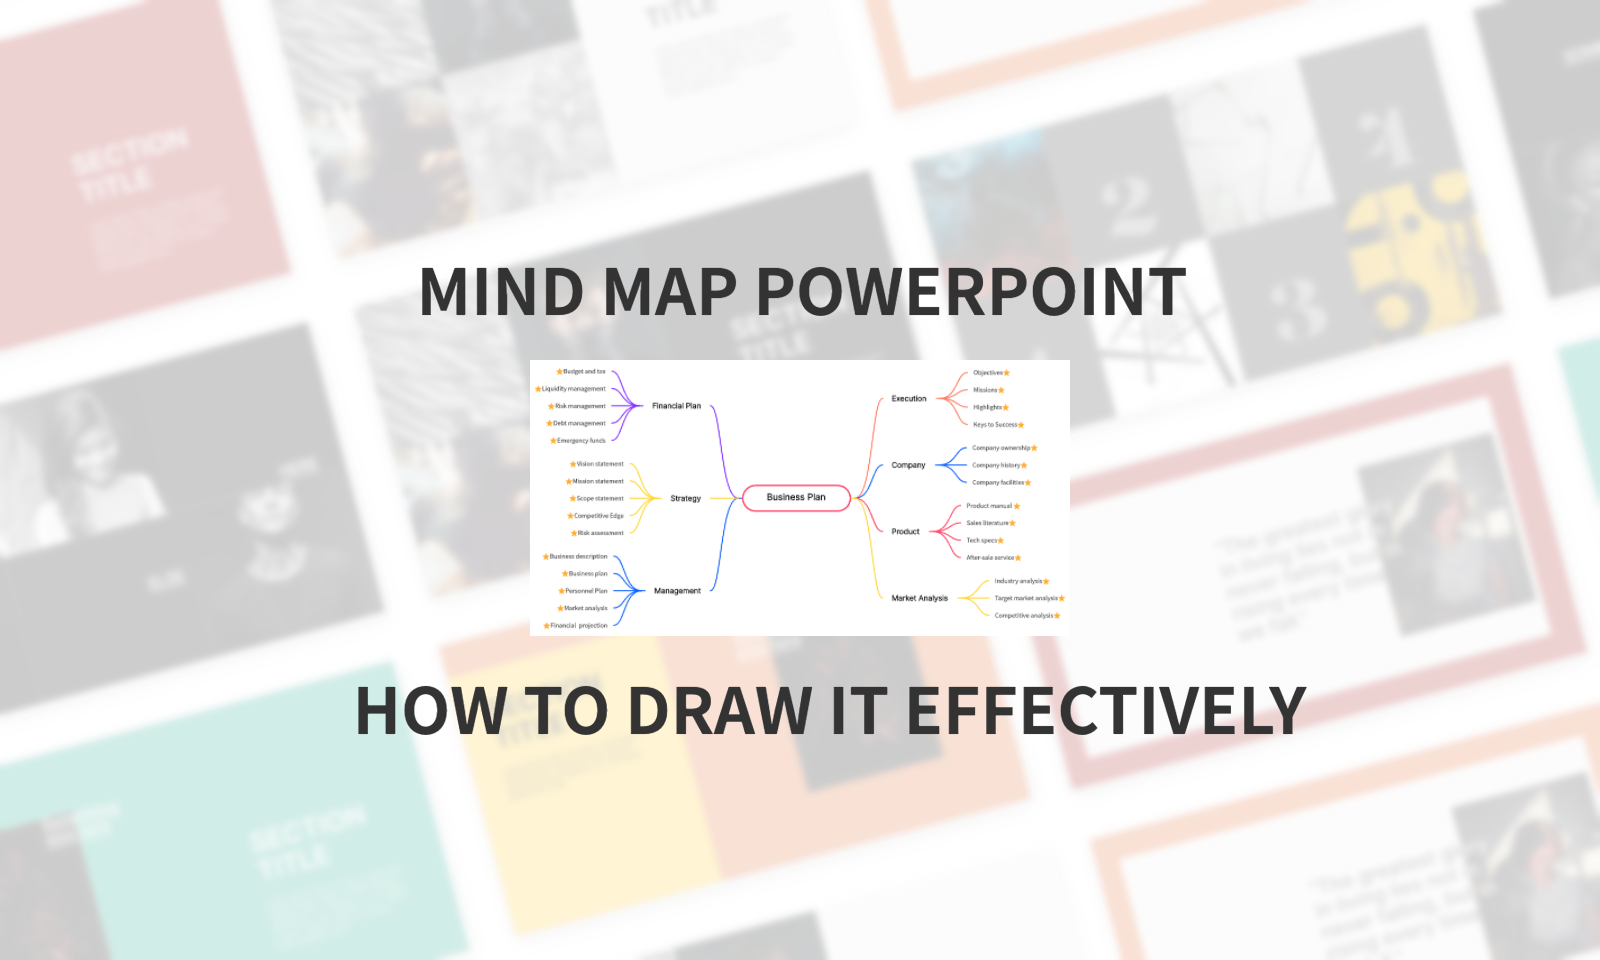 Mind Map PowerPoint: How to Draw It Effectively